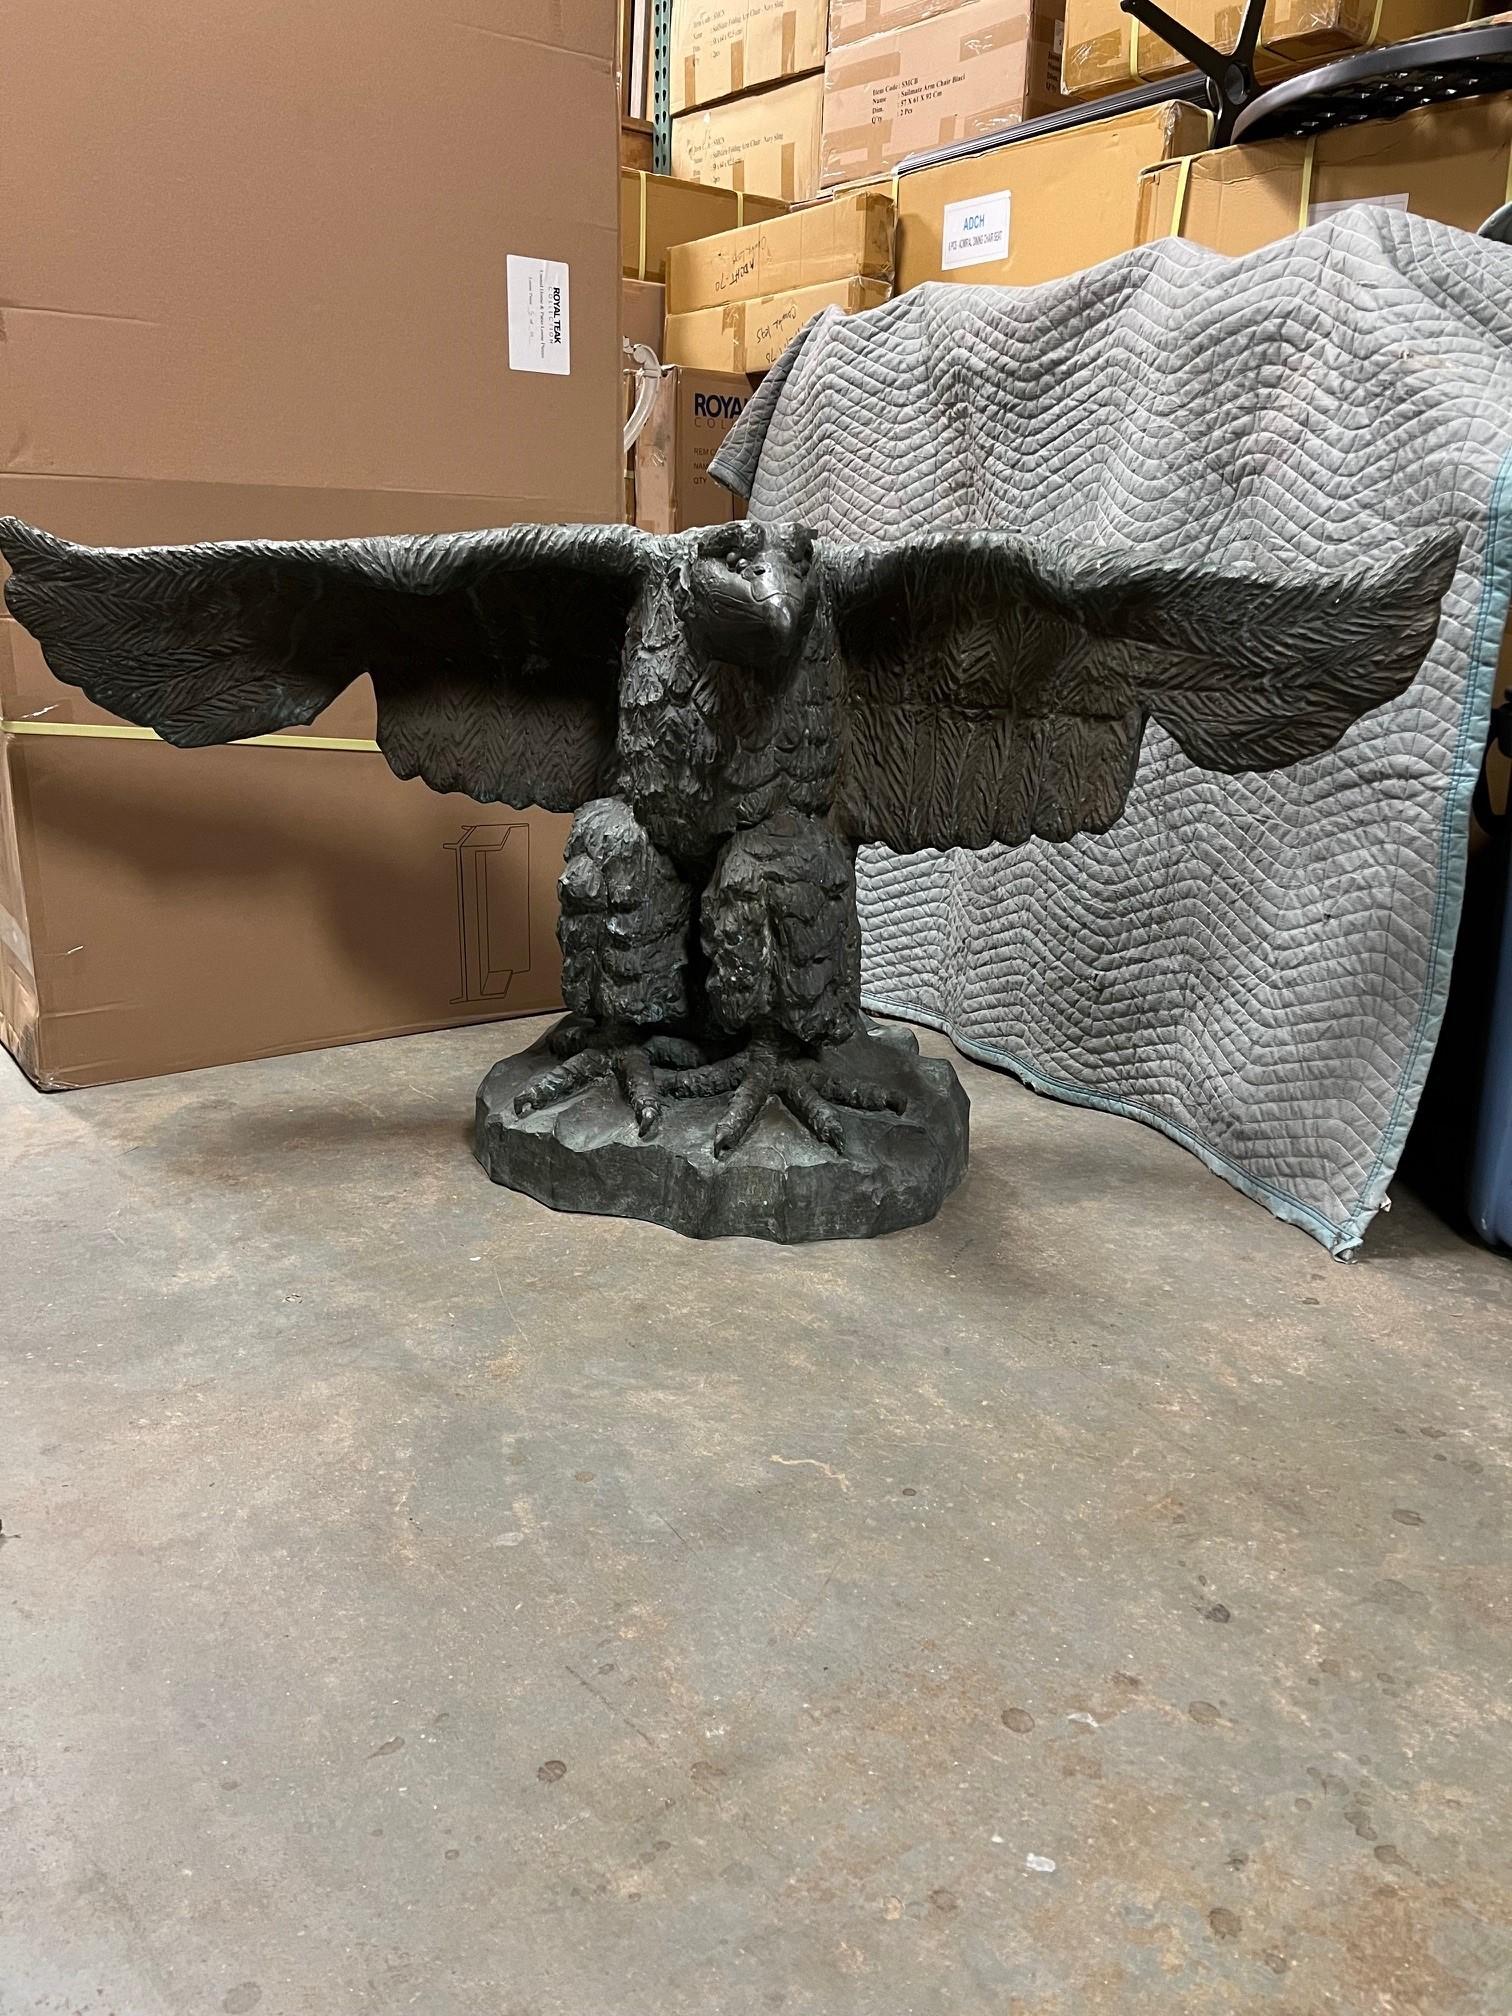 Monumental, spread winged eagle sculpture bronze console table signed by the artist. This is a wonderful bronze console that would look great in a foyer or outdoor on a patio or garden. It's a very heavy and solid piece and can hold a large marble